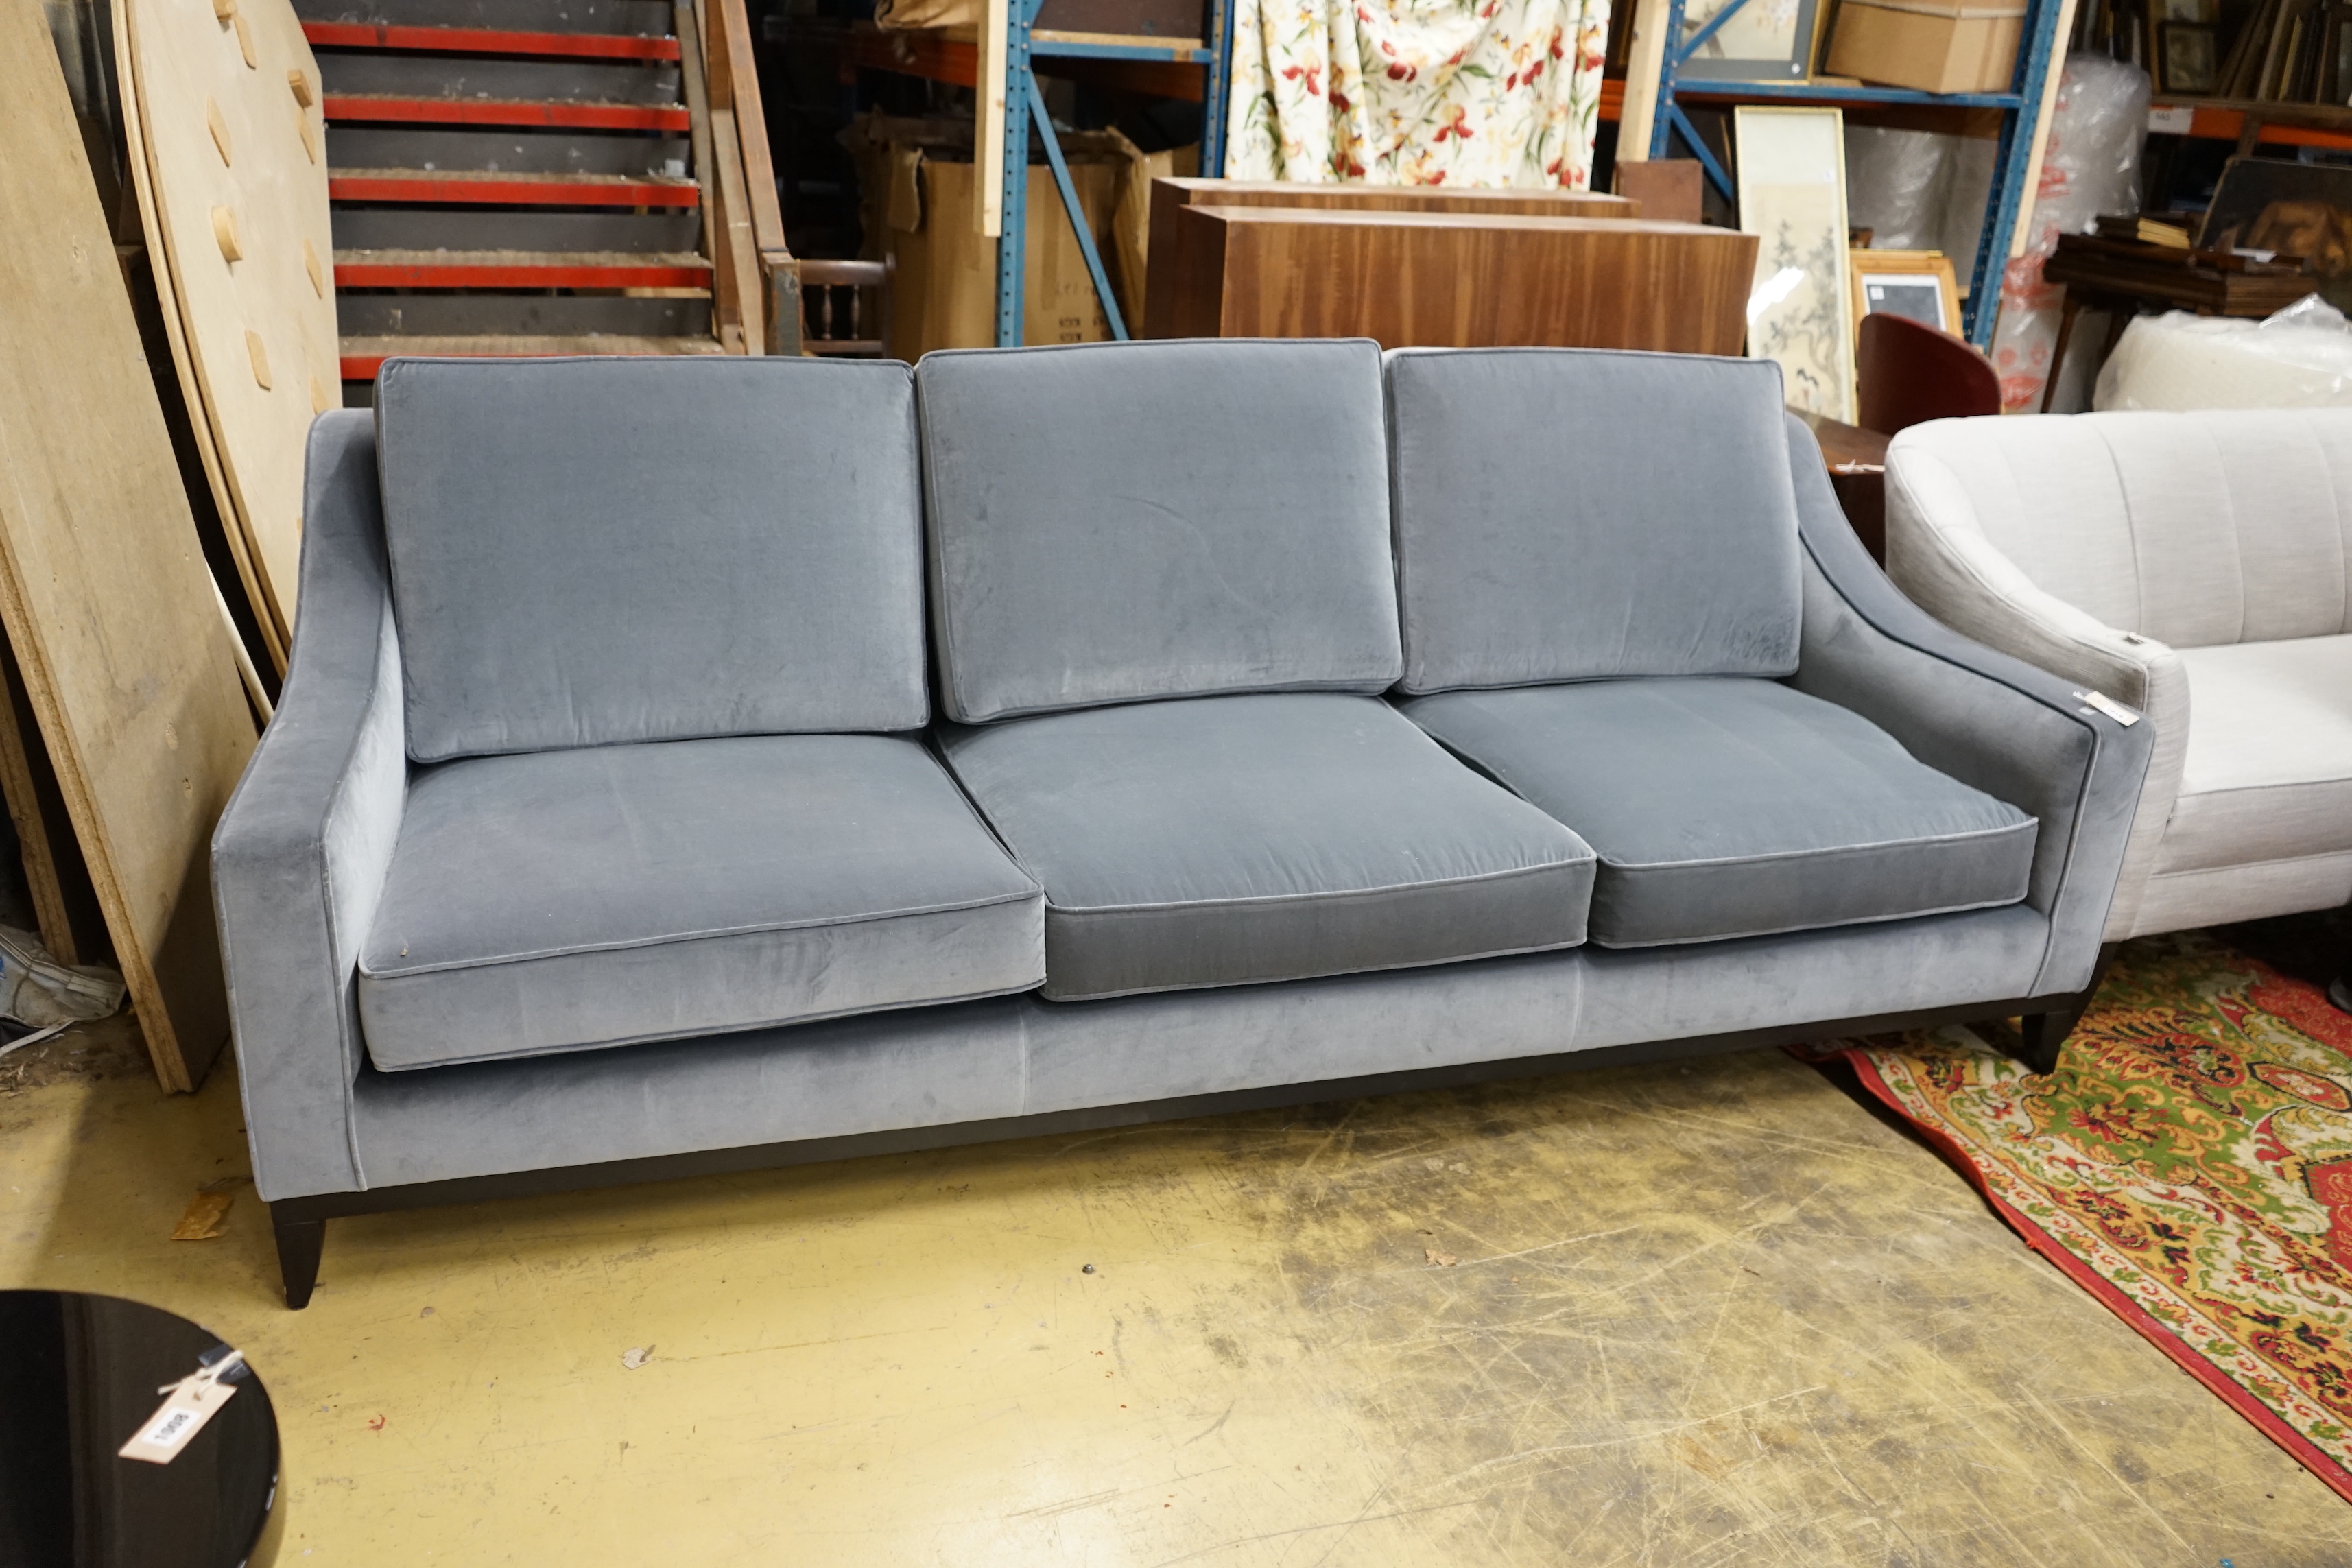 A Spencer three seater sofa by The Sofa and Chair Company, upholstered in Turnell and Gigon Gainsborough grey velvet, width 250cm, depth 100cm, height 90cm